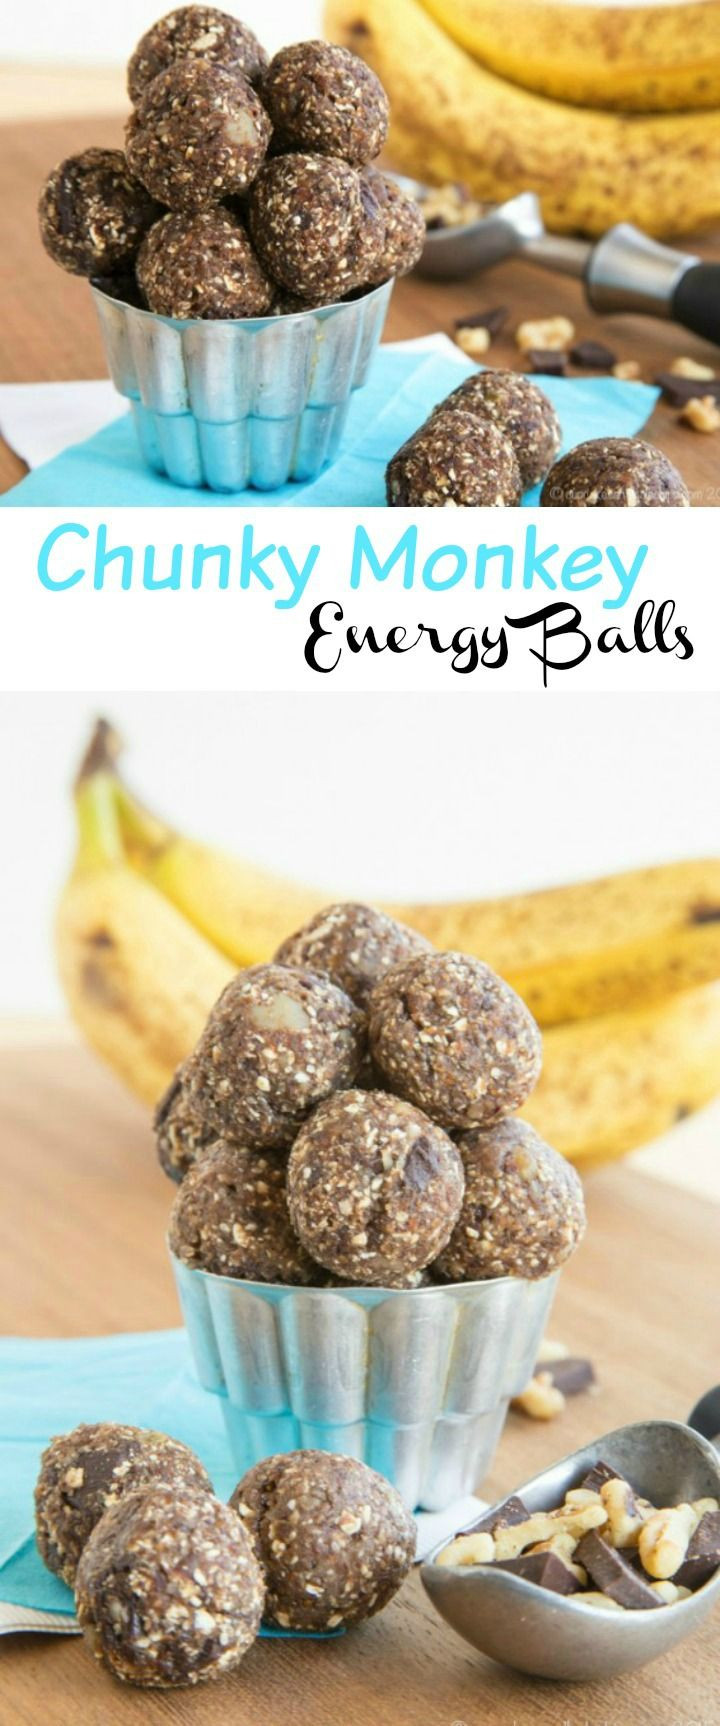 Healthy Energy Snacks
 1000 images about Pinterest Favorites on Pinterest